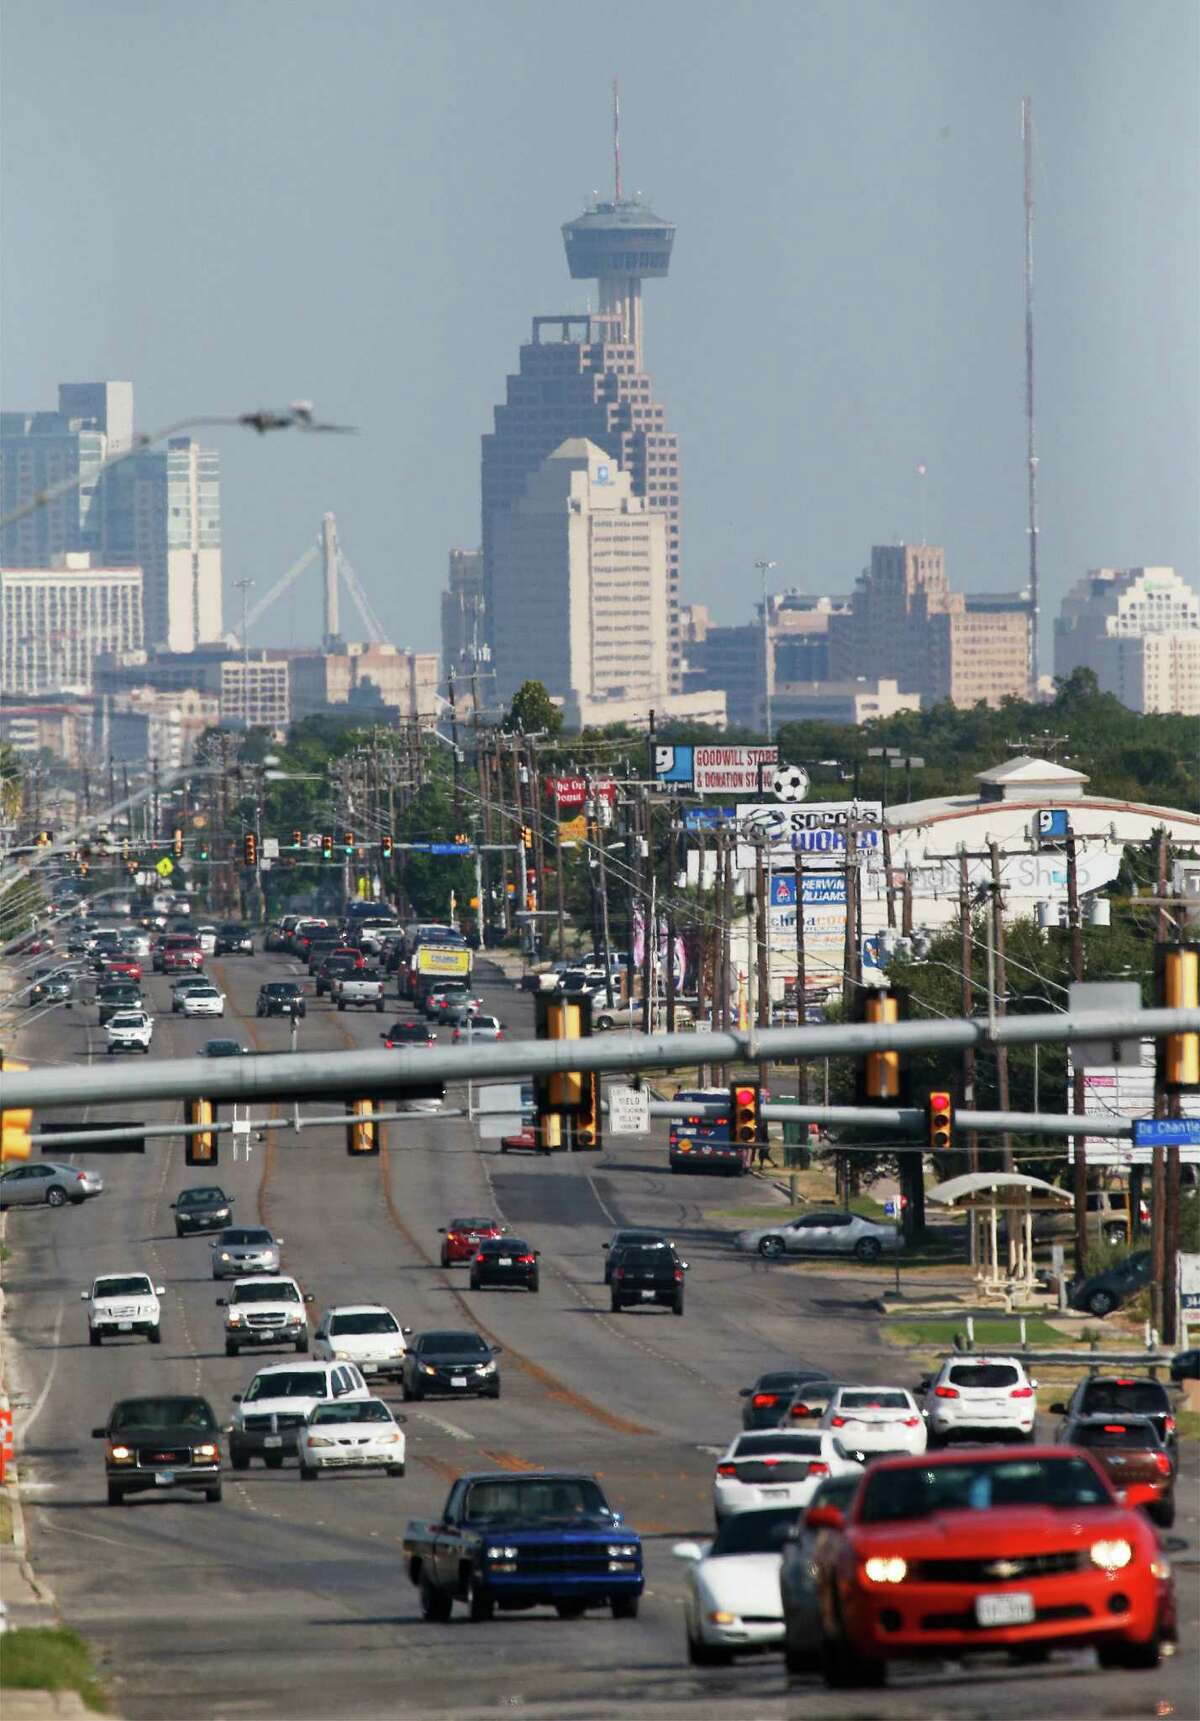 A view of downtown San Antonio from Fredericksburg Road on Aug. 12, 2016. Ground-level ozone in San Antonio cause an estimated 52 preventable deaths per year, according to a new public health study by New York University and the American Thoracic Society.